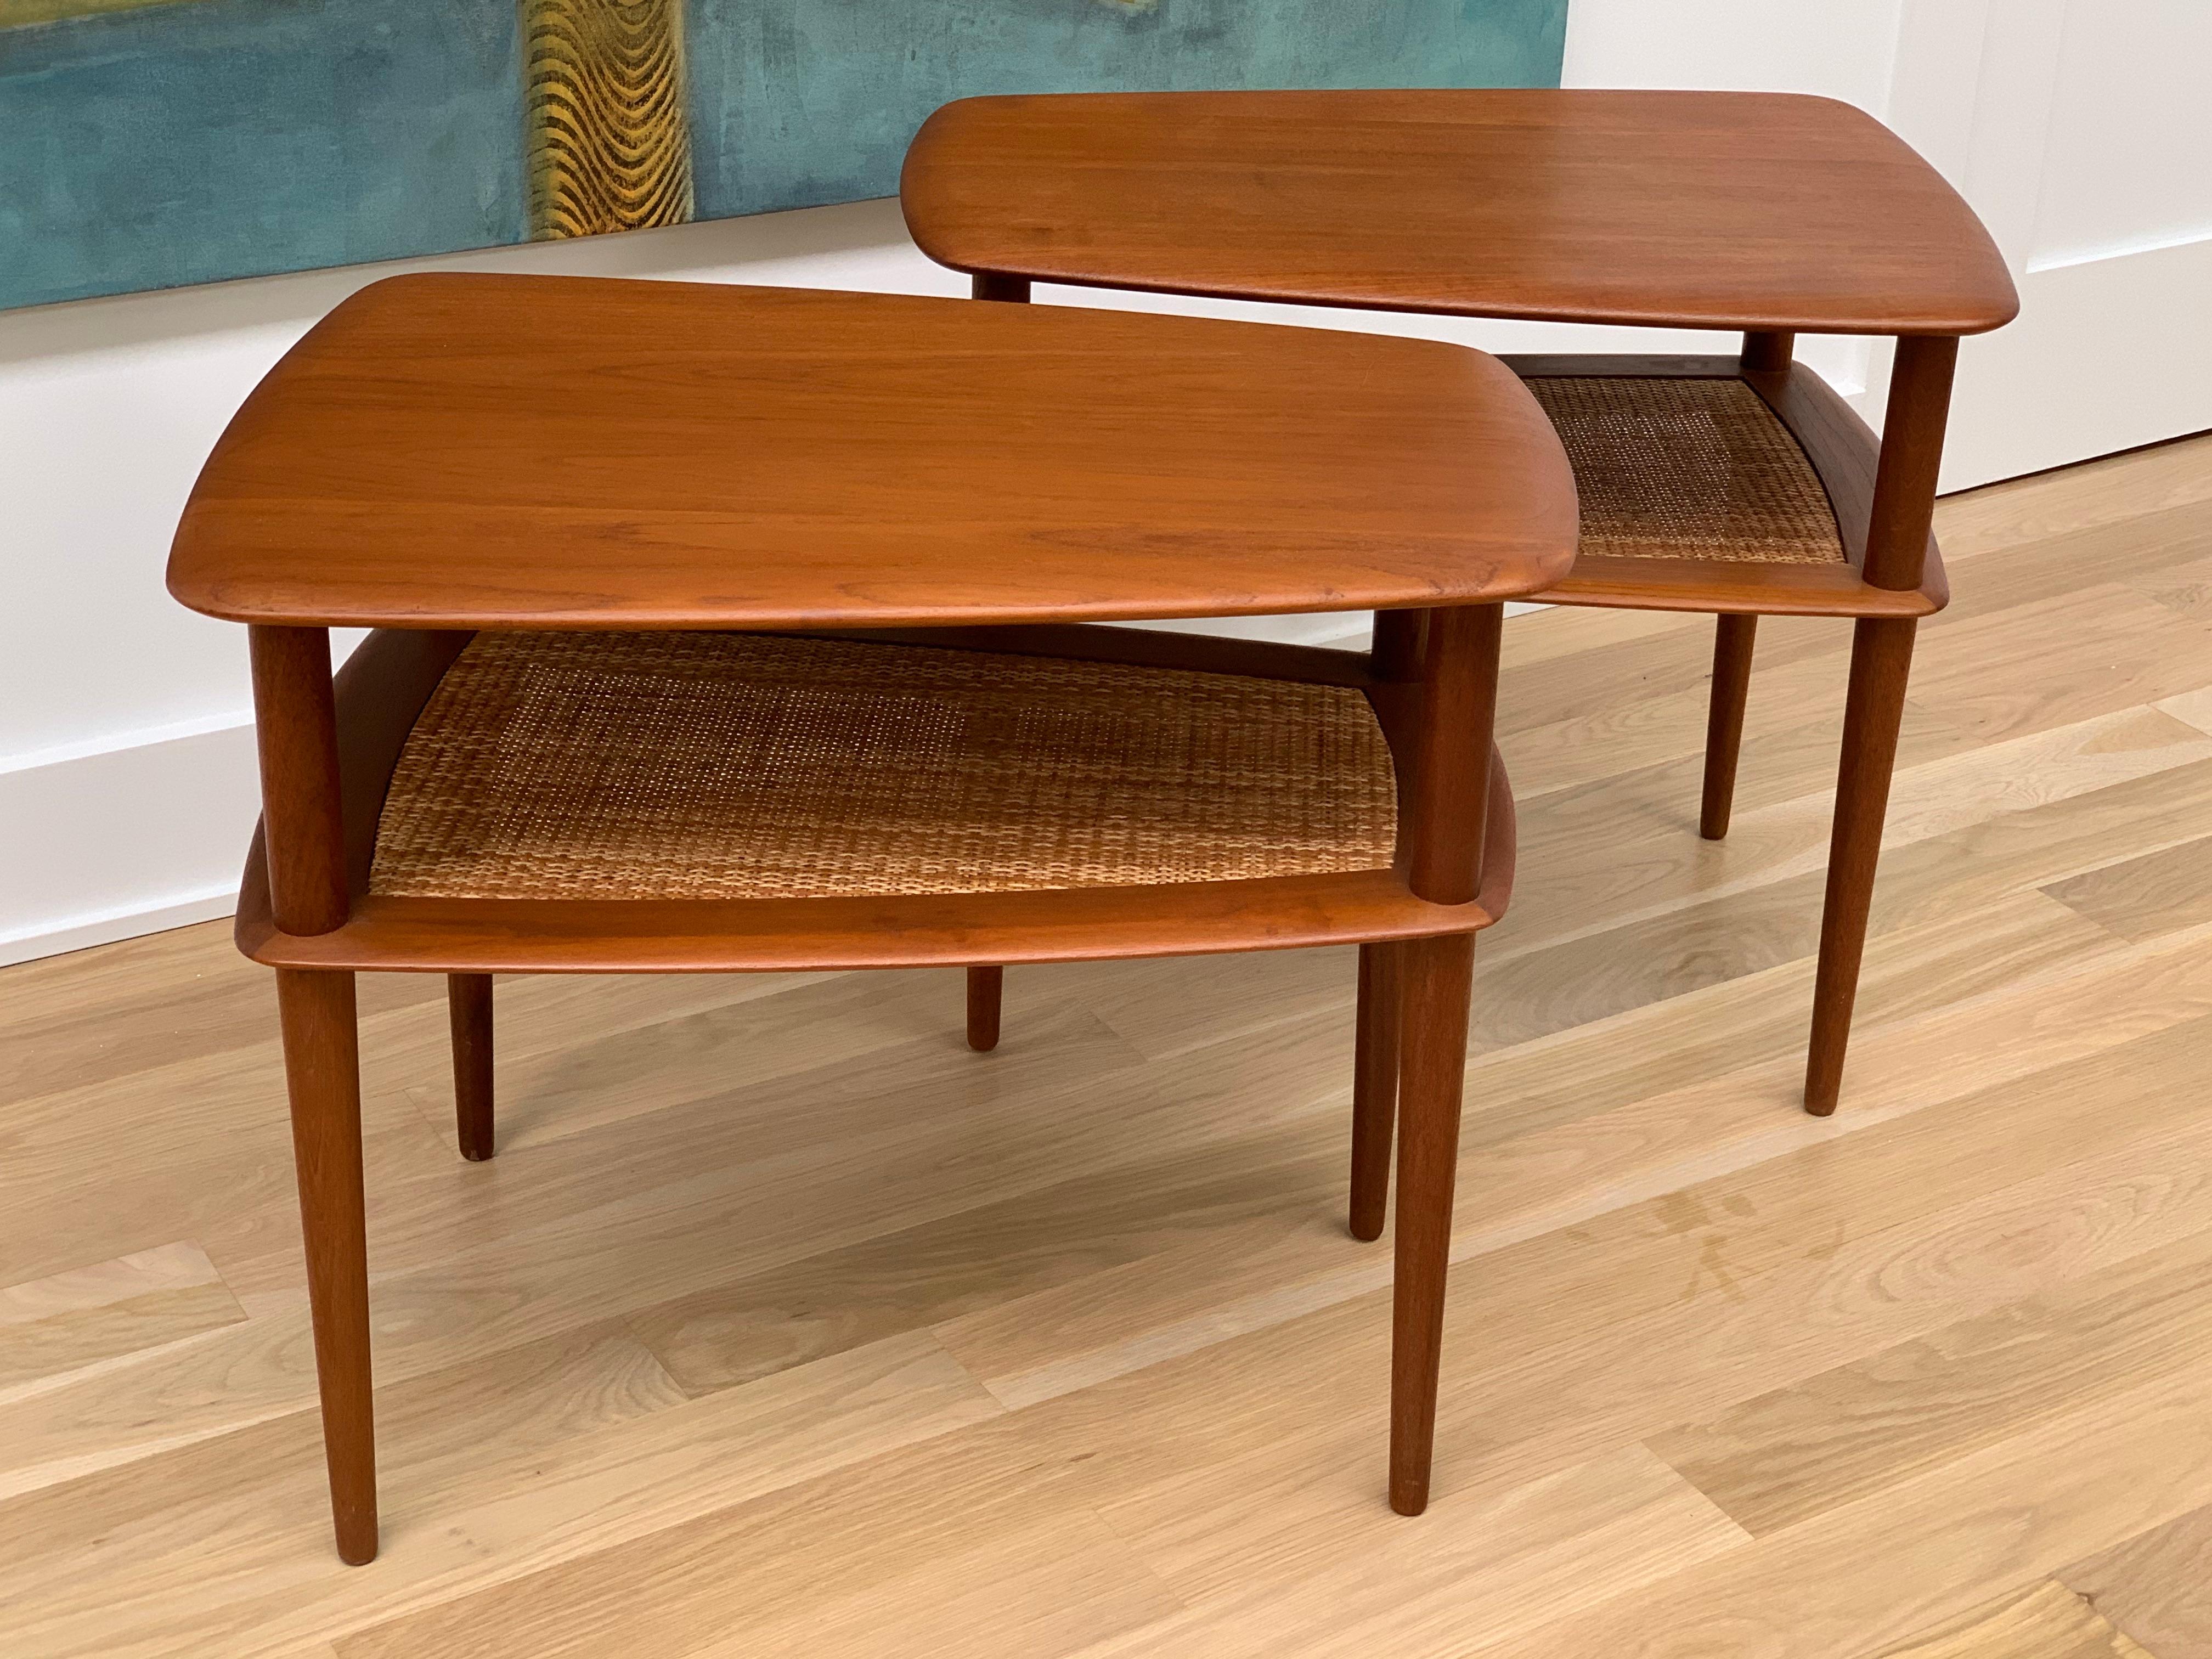 Matched pair of teak side tables with rush shelf designed by Peter Hvidt and Orla Molgaard-Nielsen for France and Sons. All teak, with a magazine shelf with inset of rush. Design details of tapered legs, round soft edges. The tables are designed